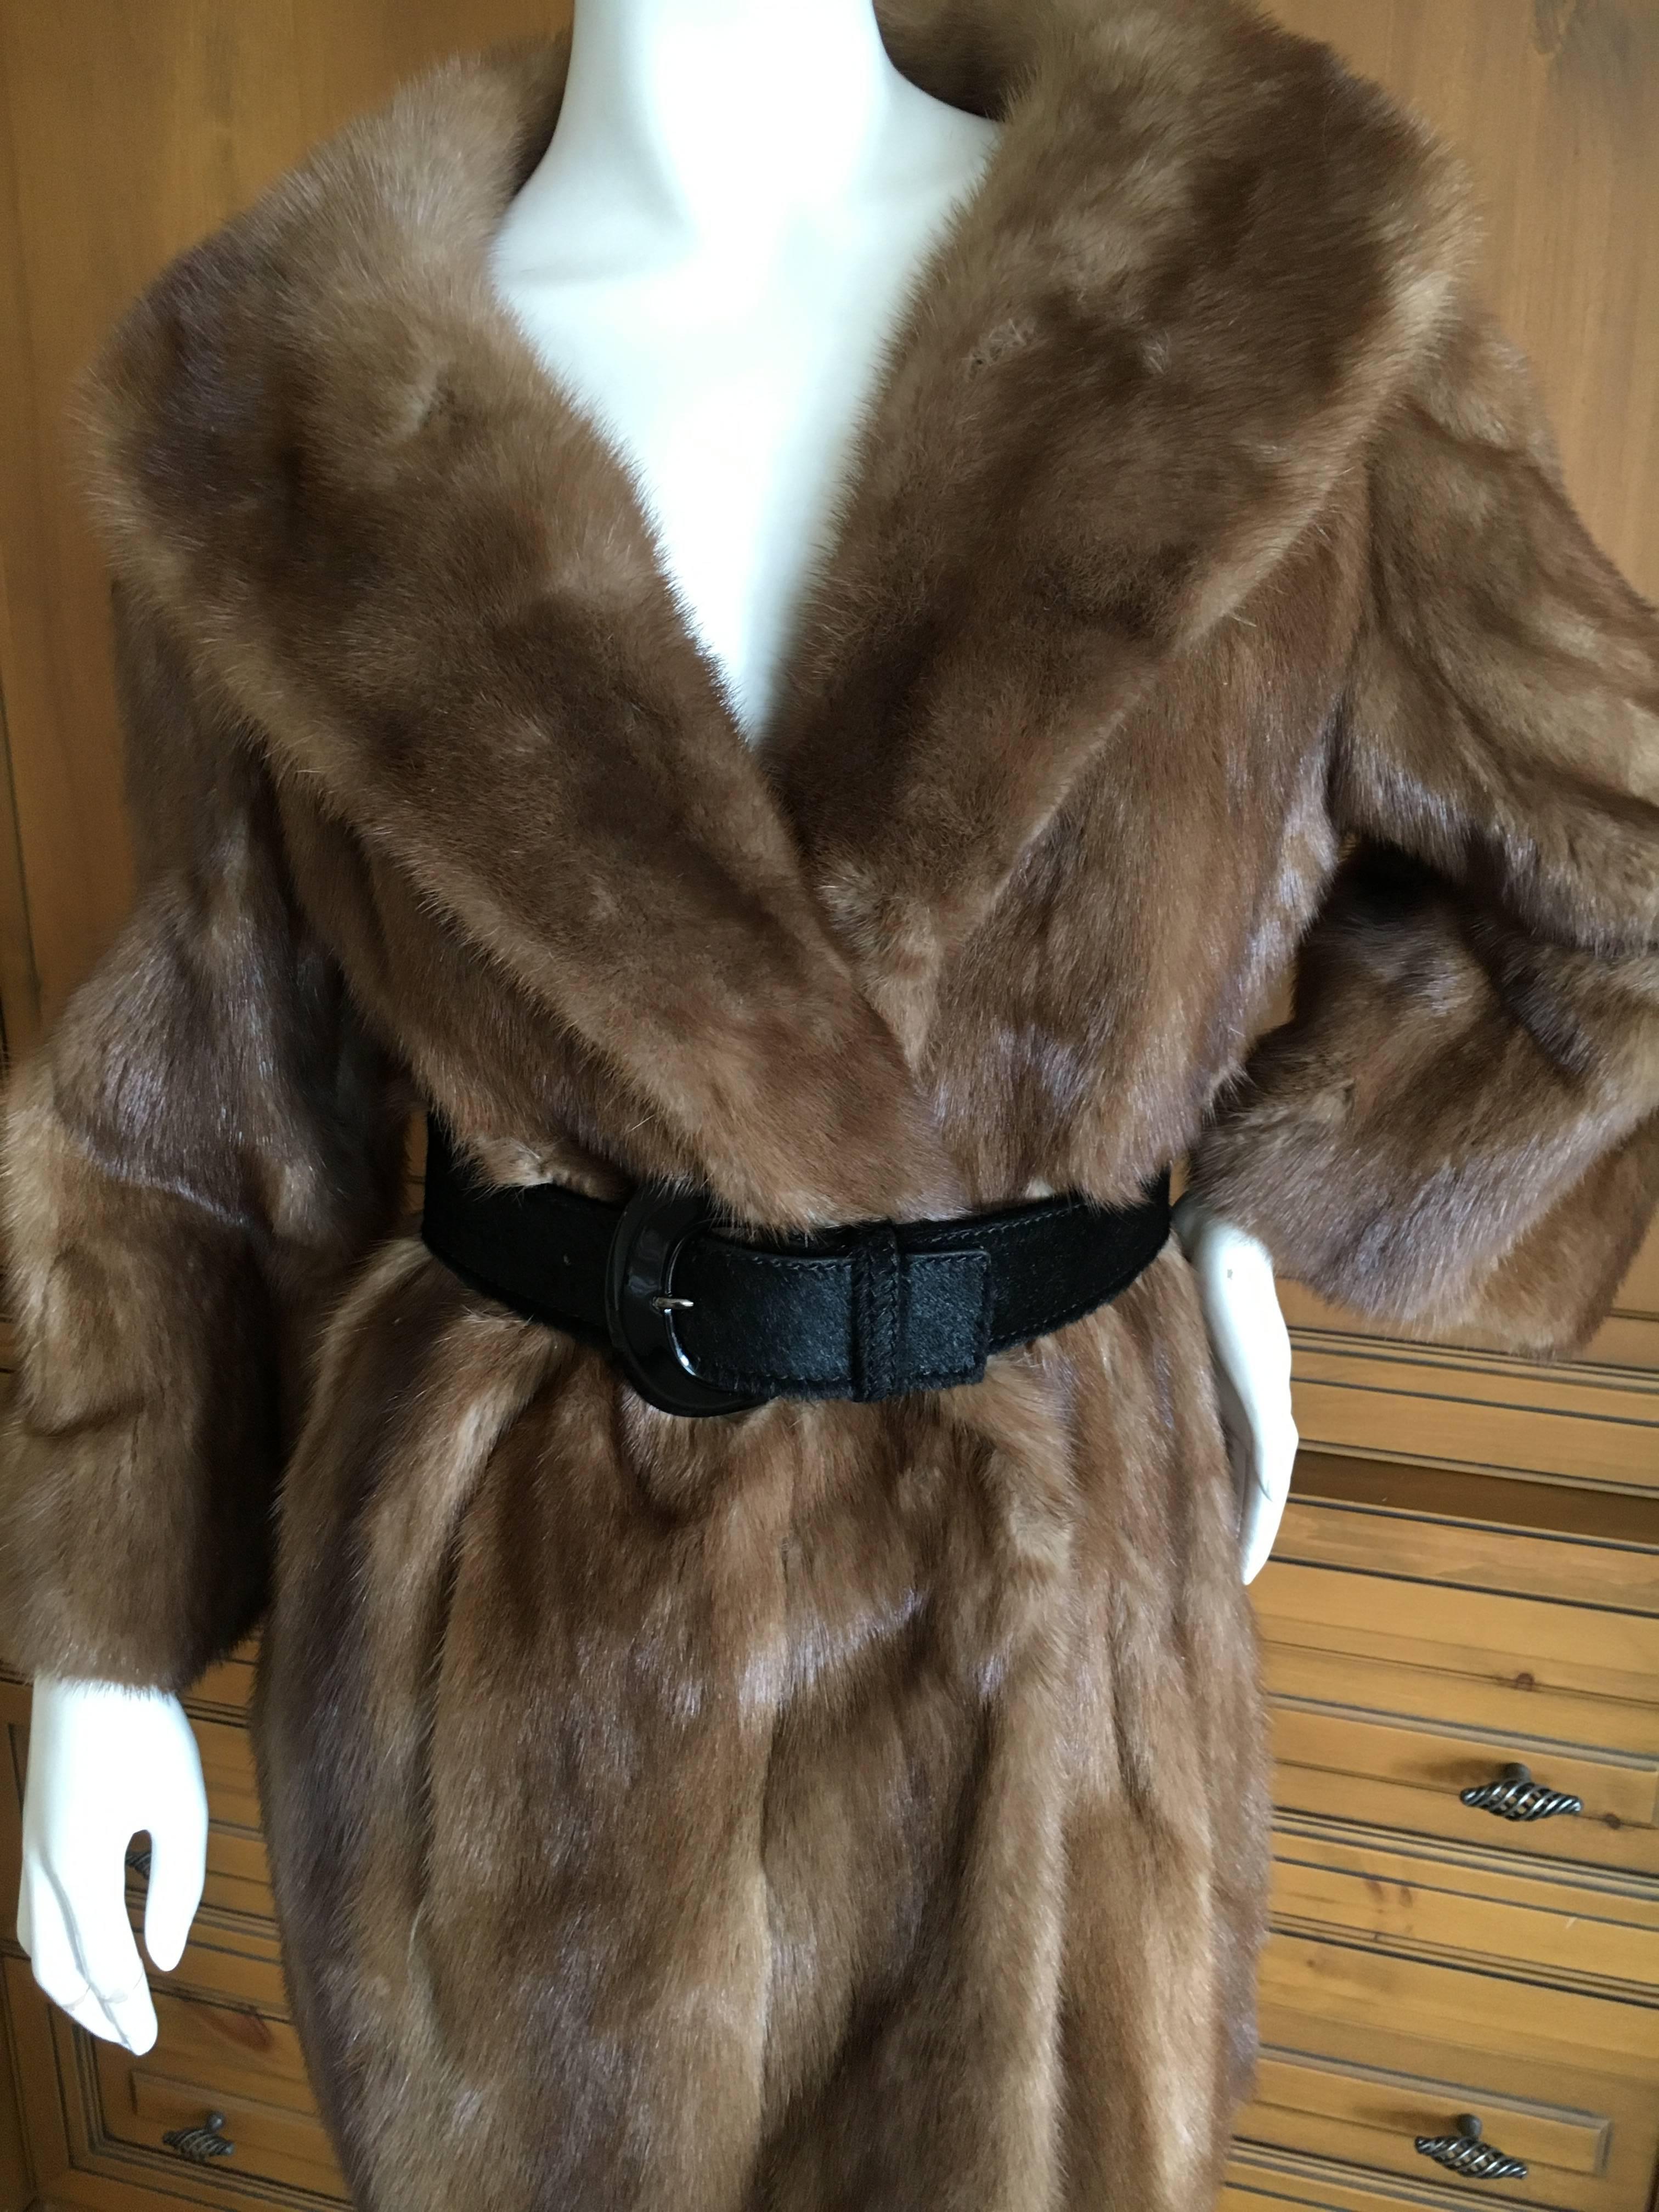 Schiaparelli Paris Luxurious Mink Fur Coat
Lined in signature Schiaparelli logo silk, this was purchased in Paris, and back in the day was the finest Paris fashion.
Great pre owned Condition, no issues.
Belt for styling only, not included.
Bust